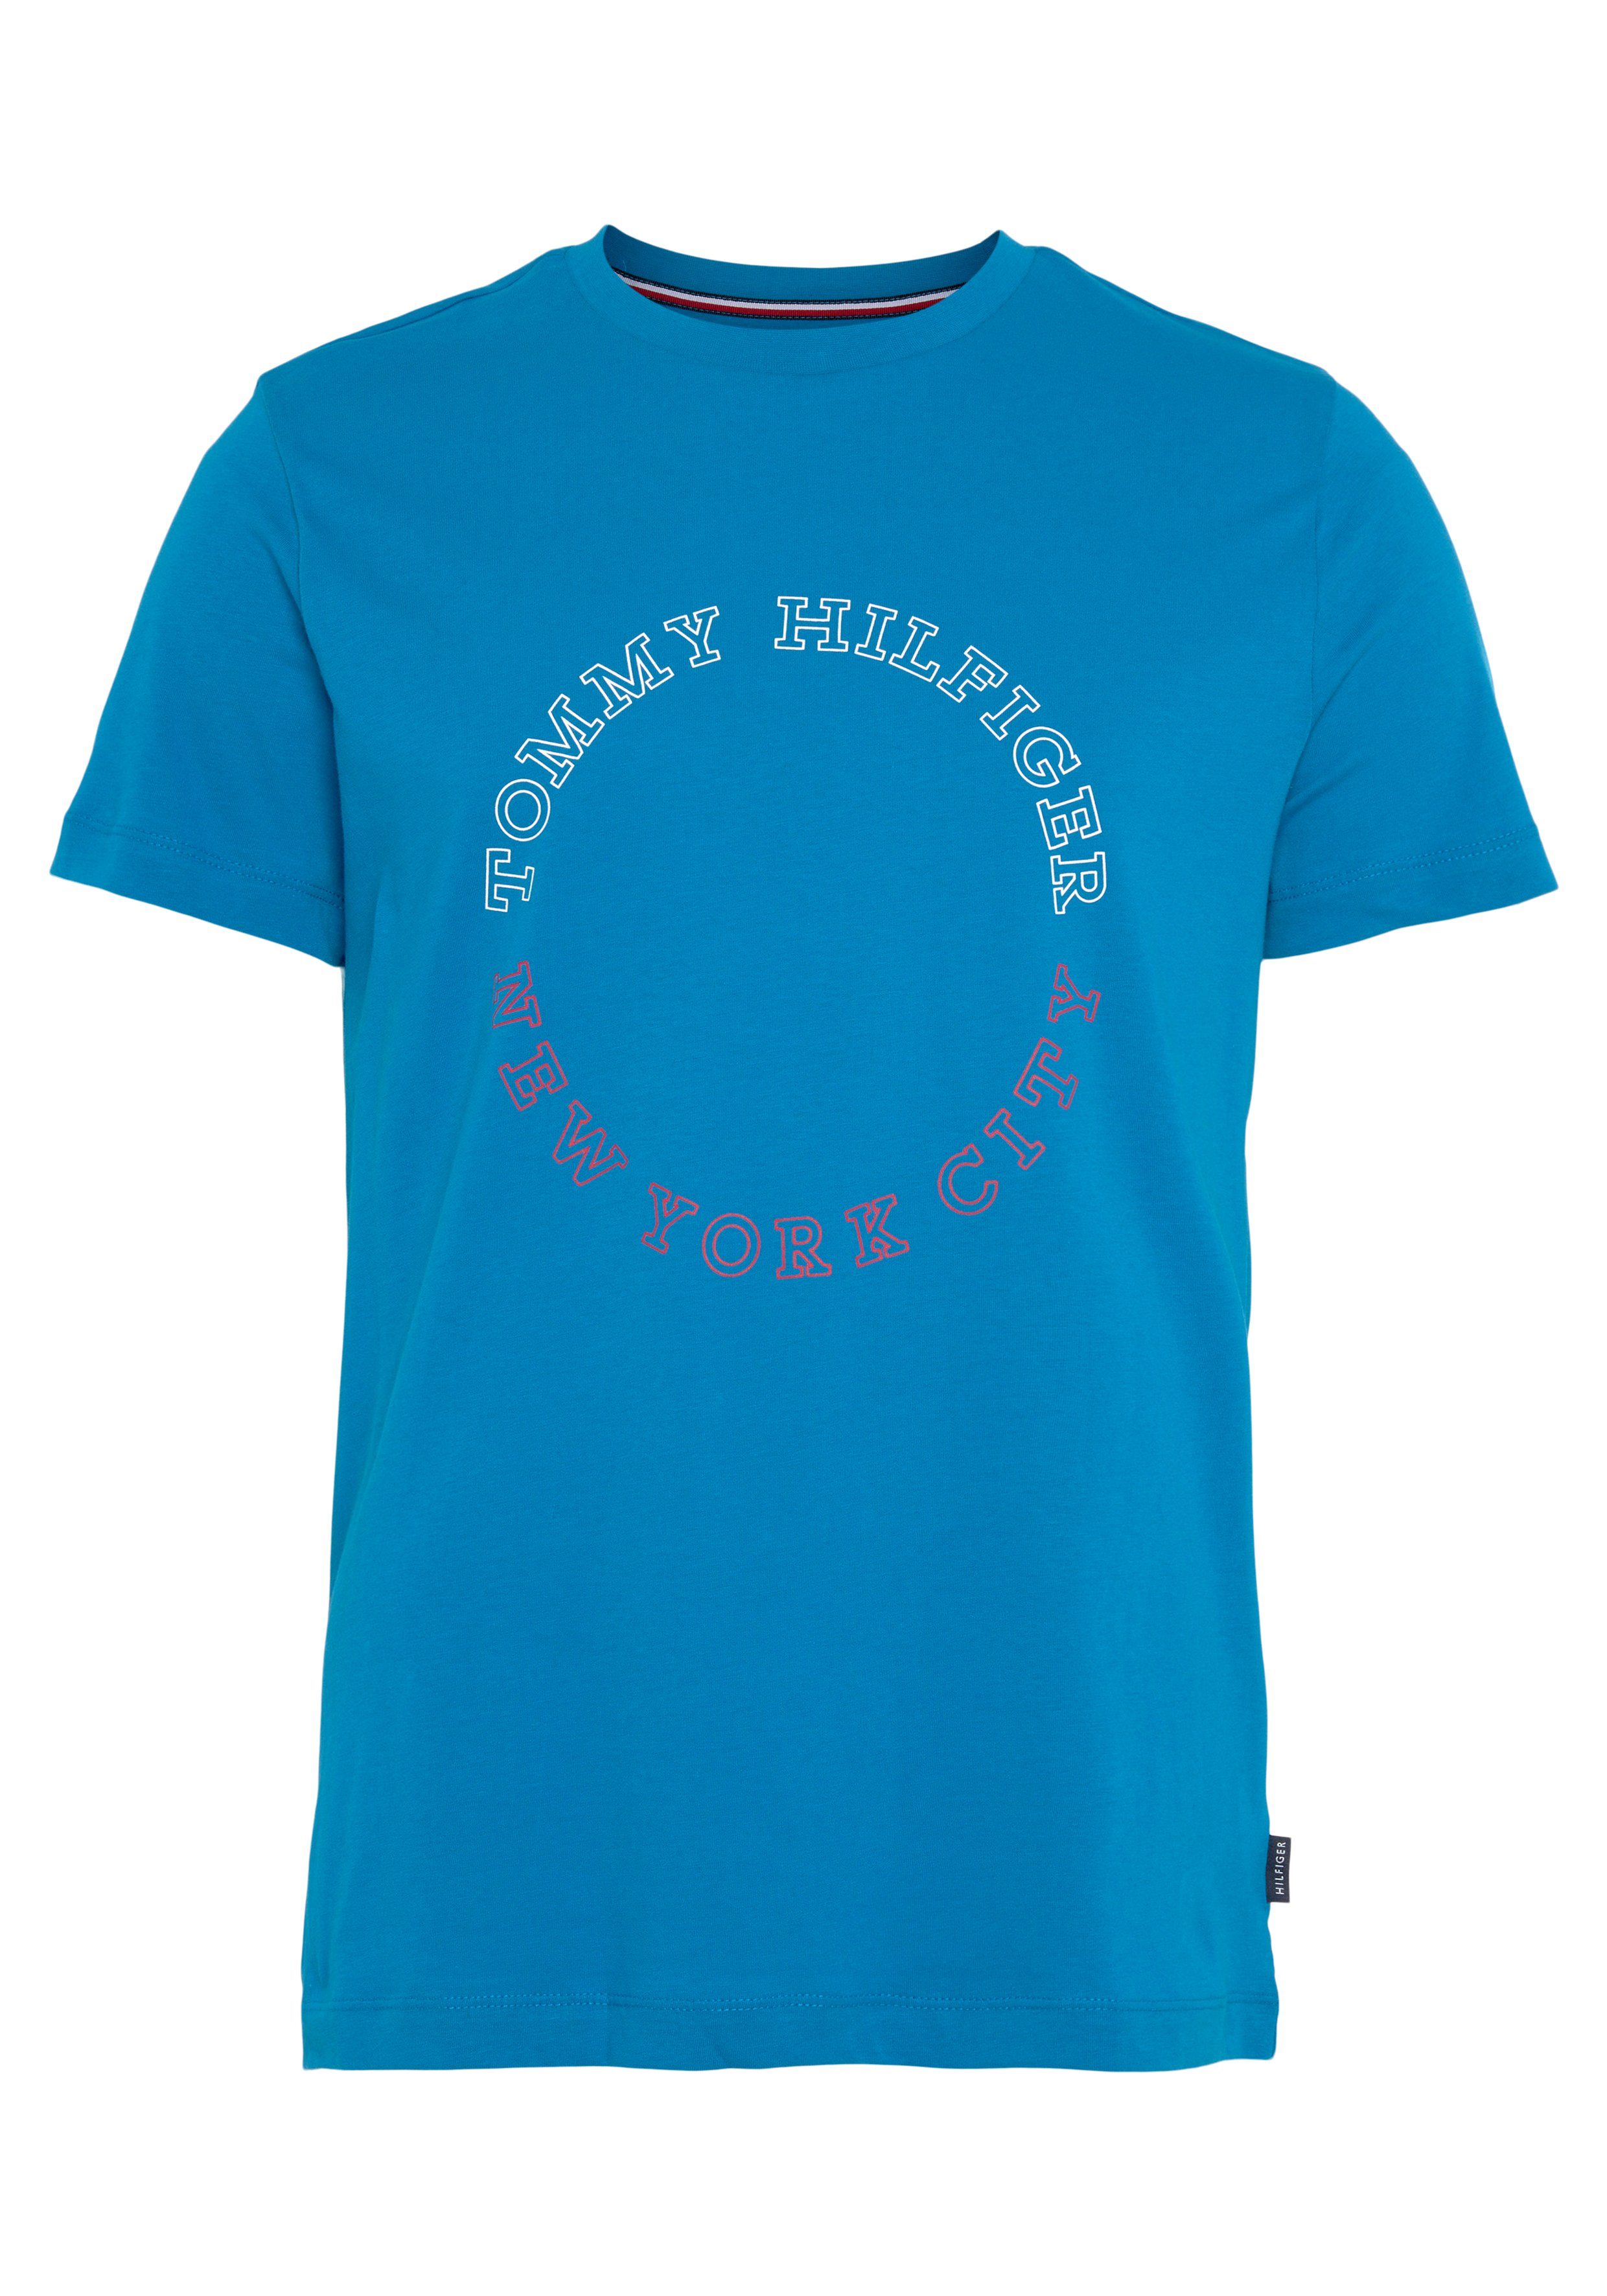 Tommy Hilfiger T-Shirt MONOTYPE Cerulean TEE ROUNDLE Aqua